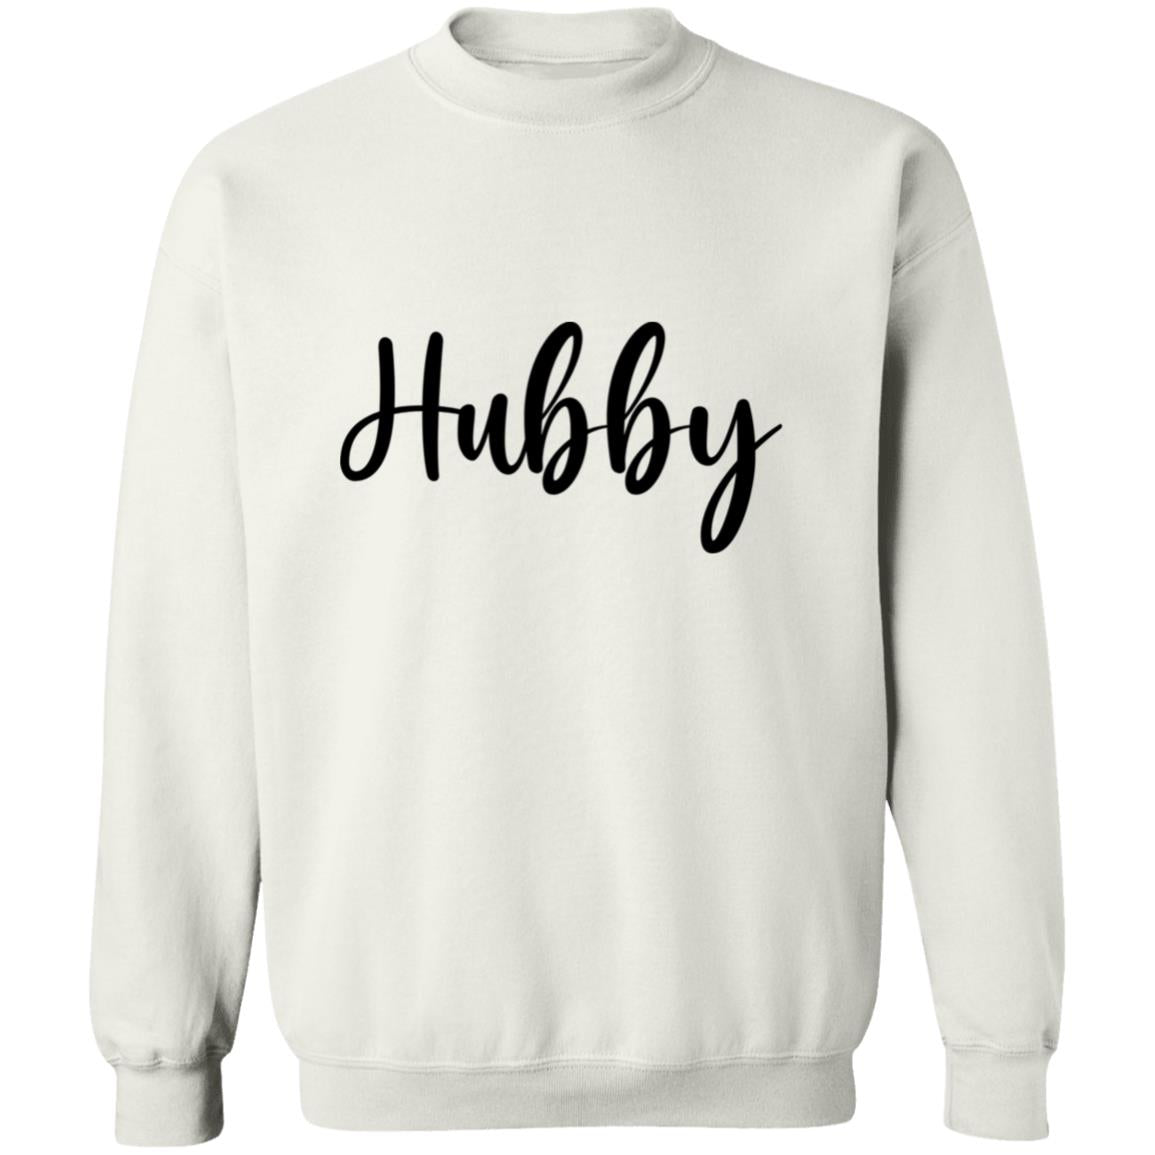 Get trendy with Hubby G180 Crewneck Pullover Sweatshirt - Sweatshirts available at Good Gift Company. Grab yours for $28.95 today!